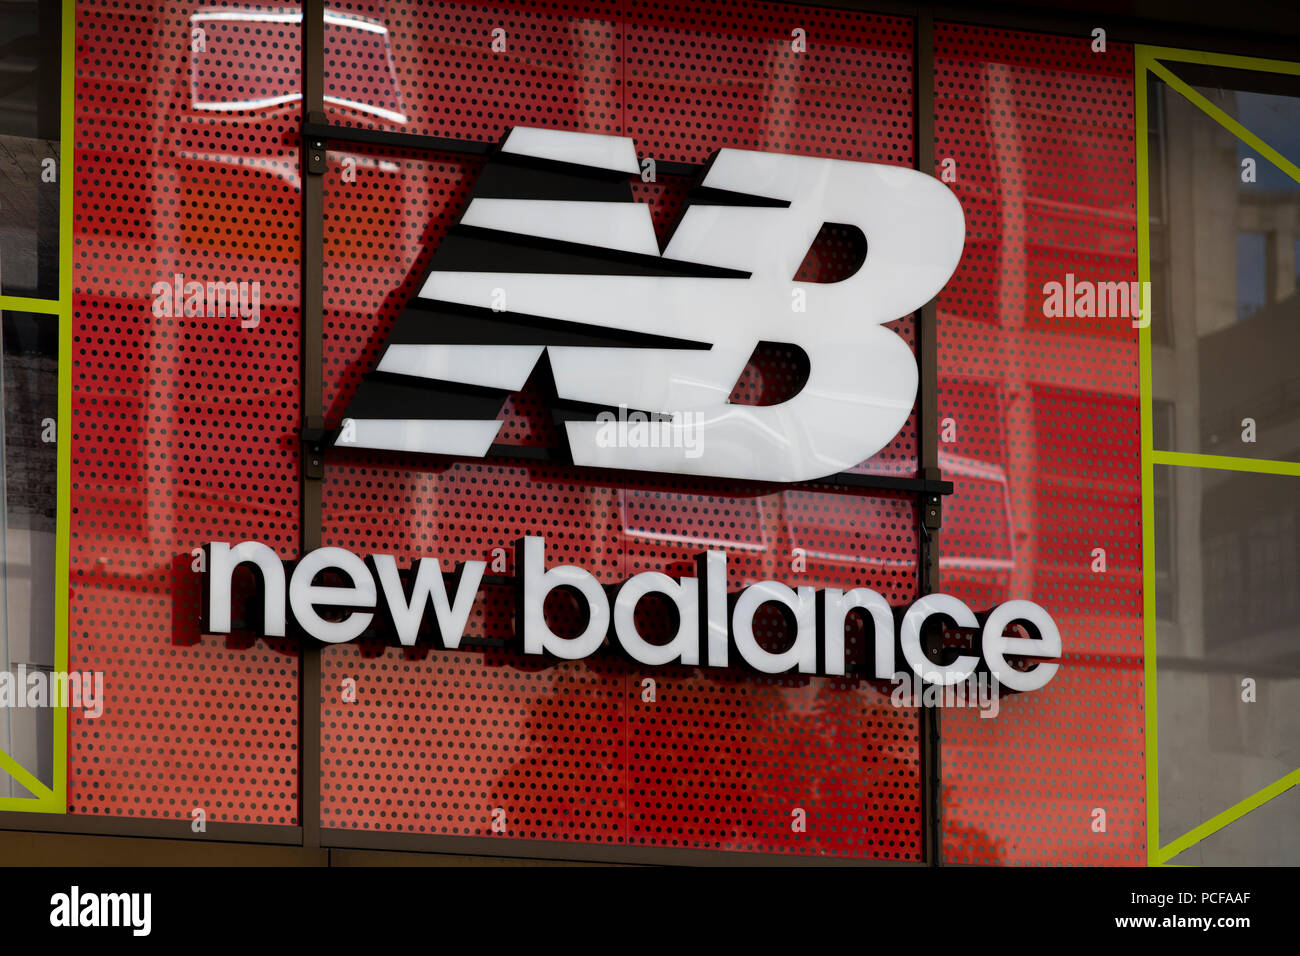 magasin new balance londres